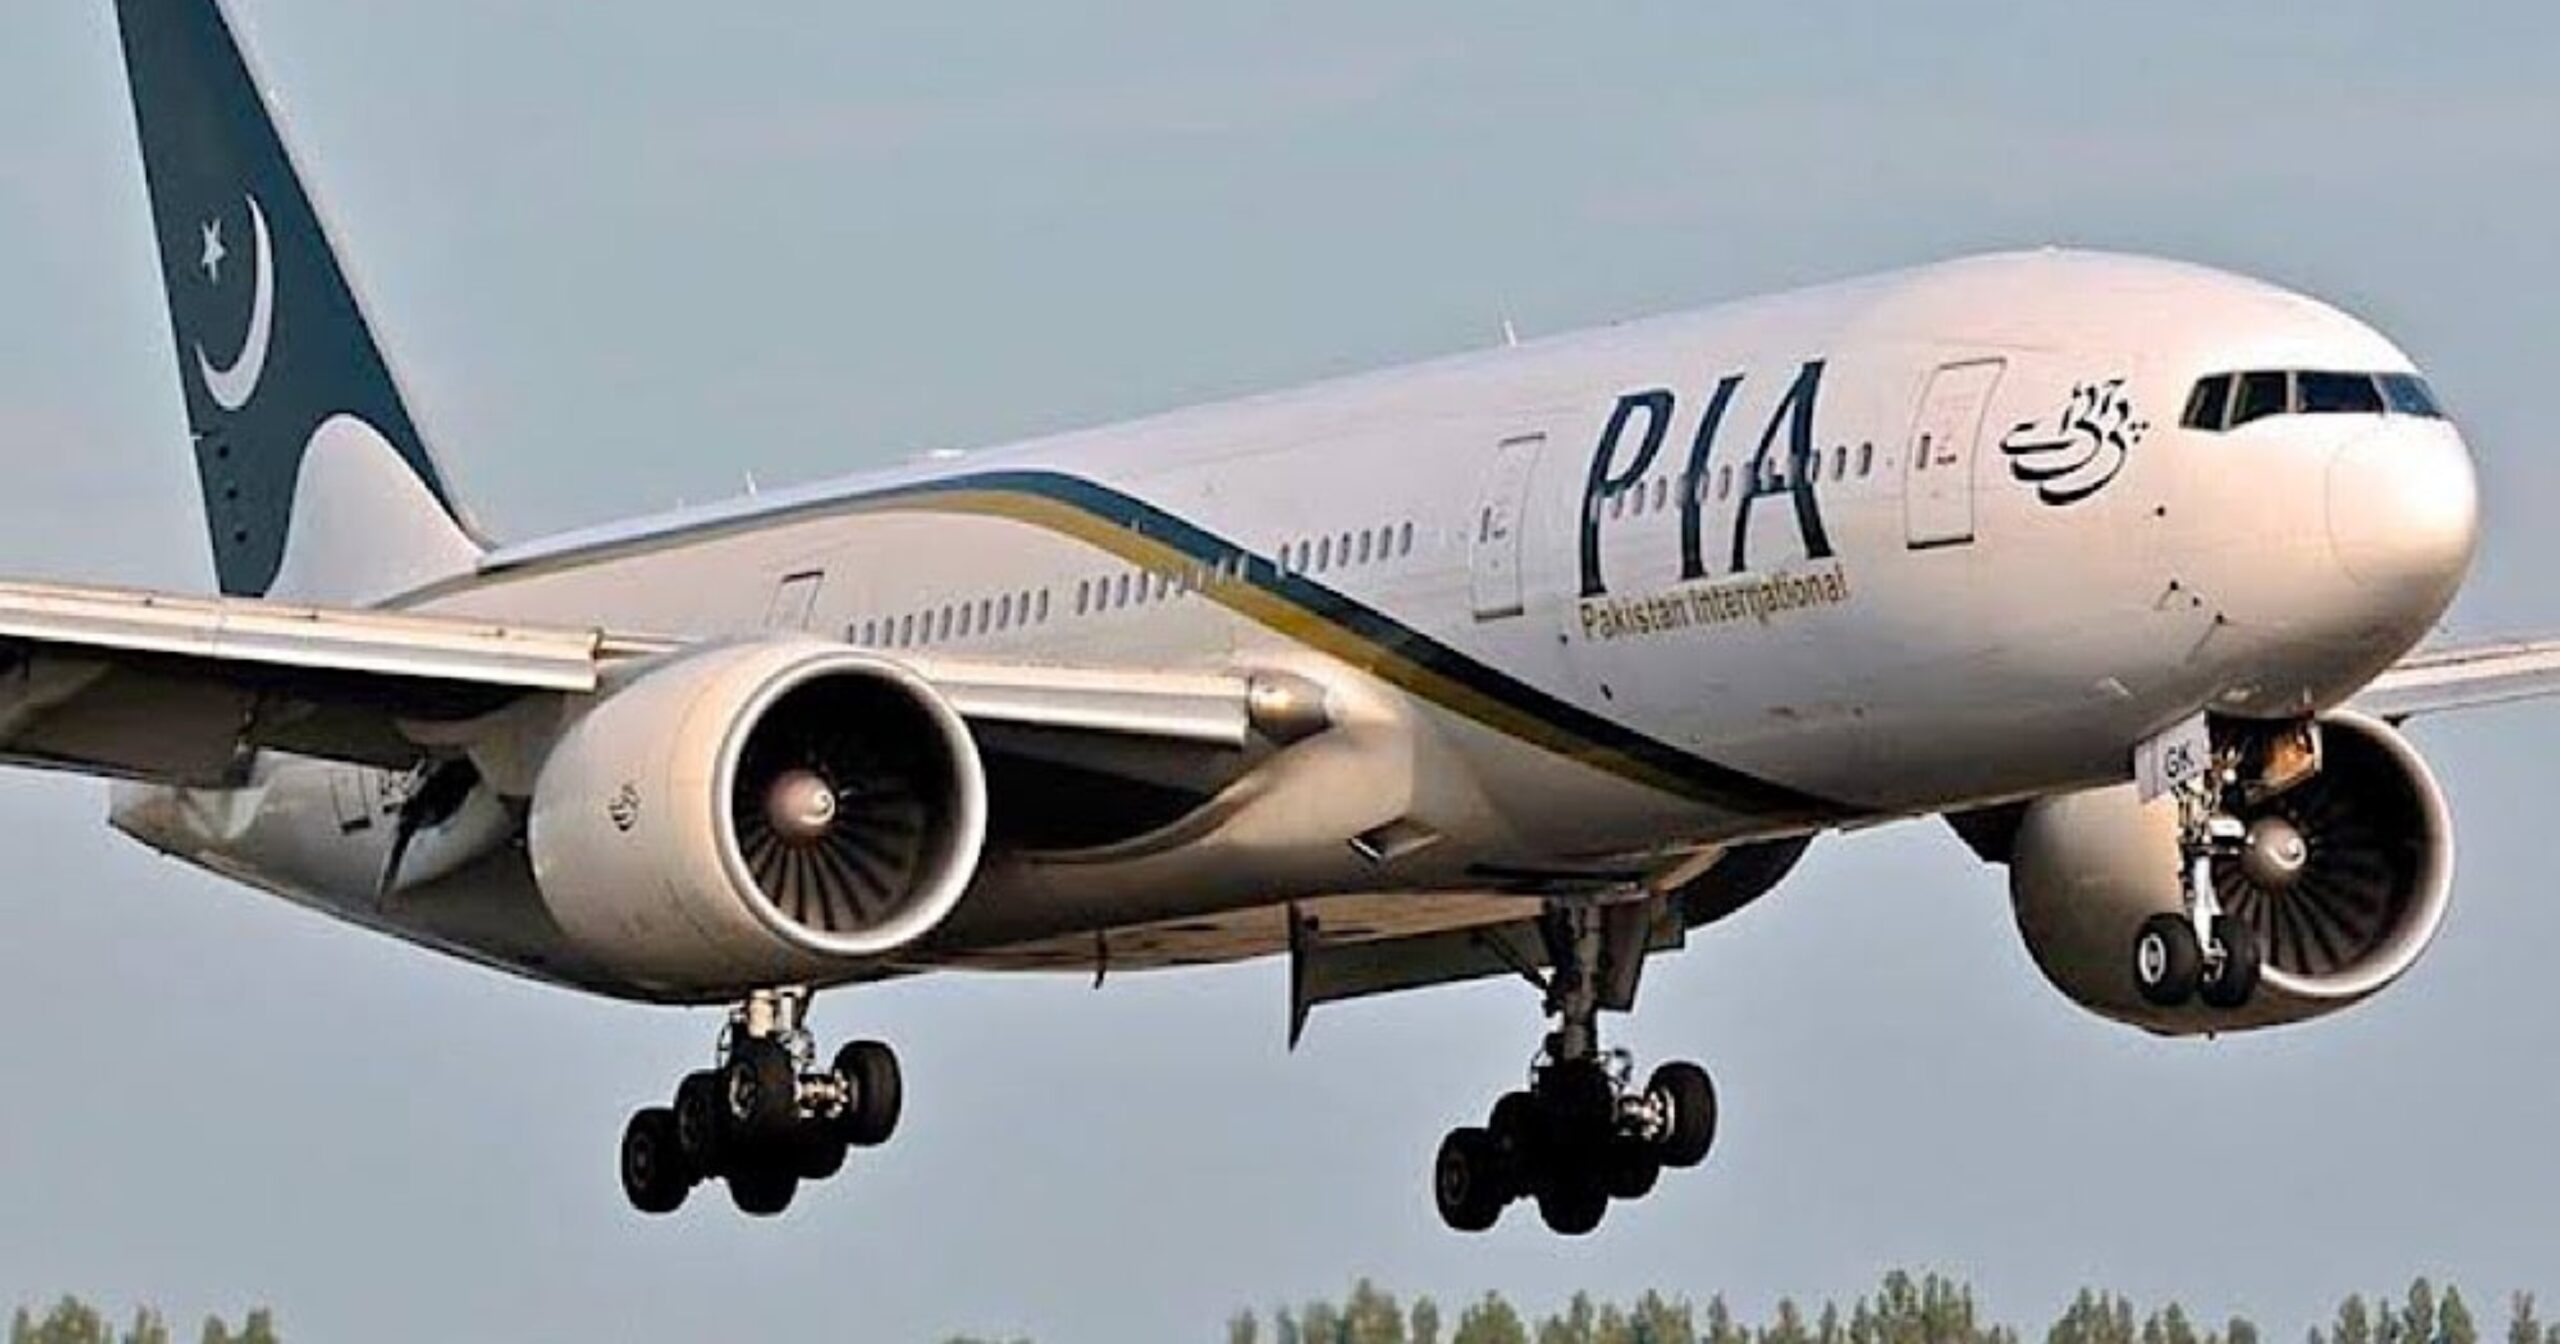 Commercial Banks Hold Their Breath as PIA Defaults on Rs. 17 Billion